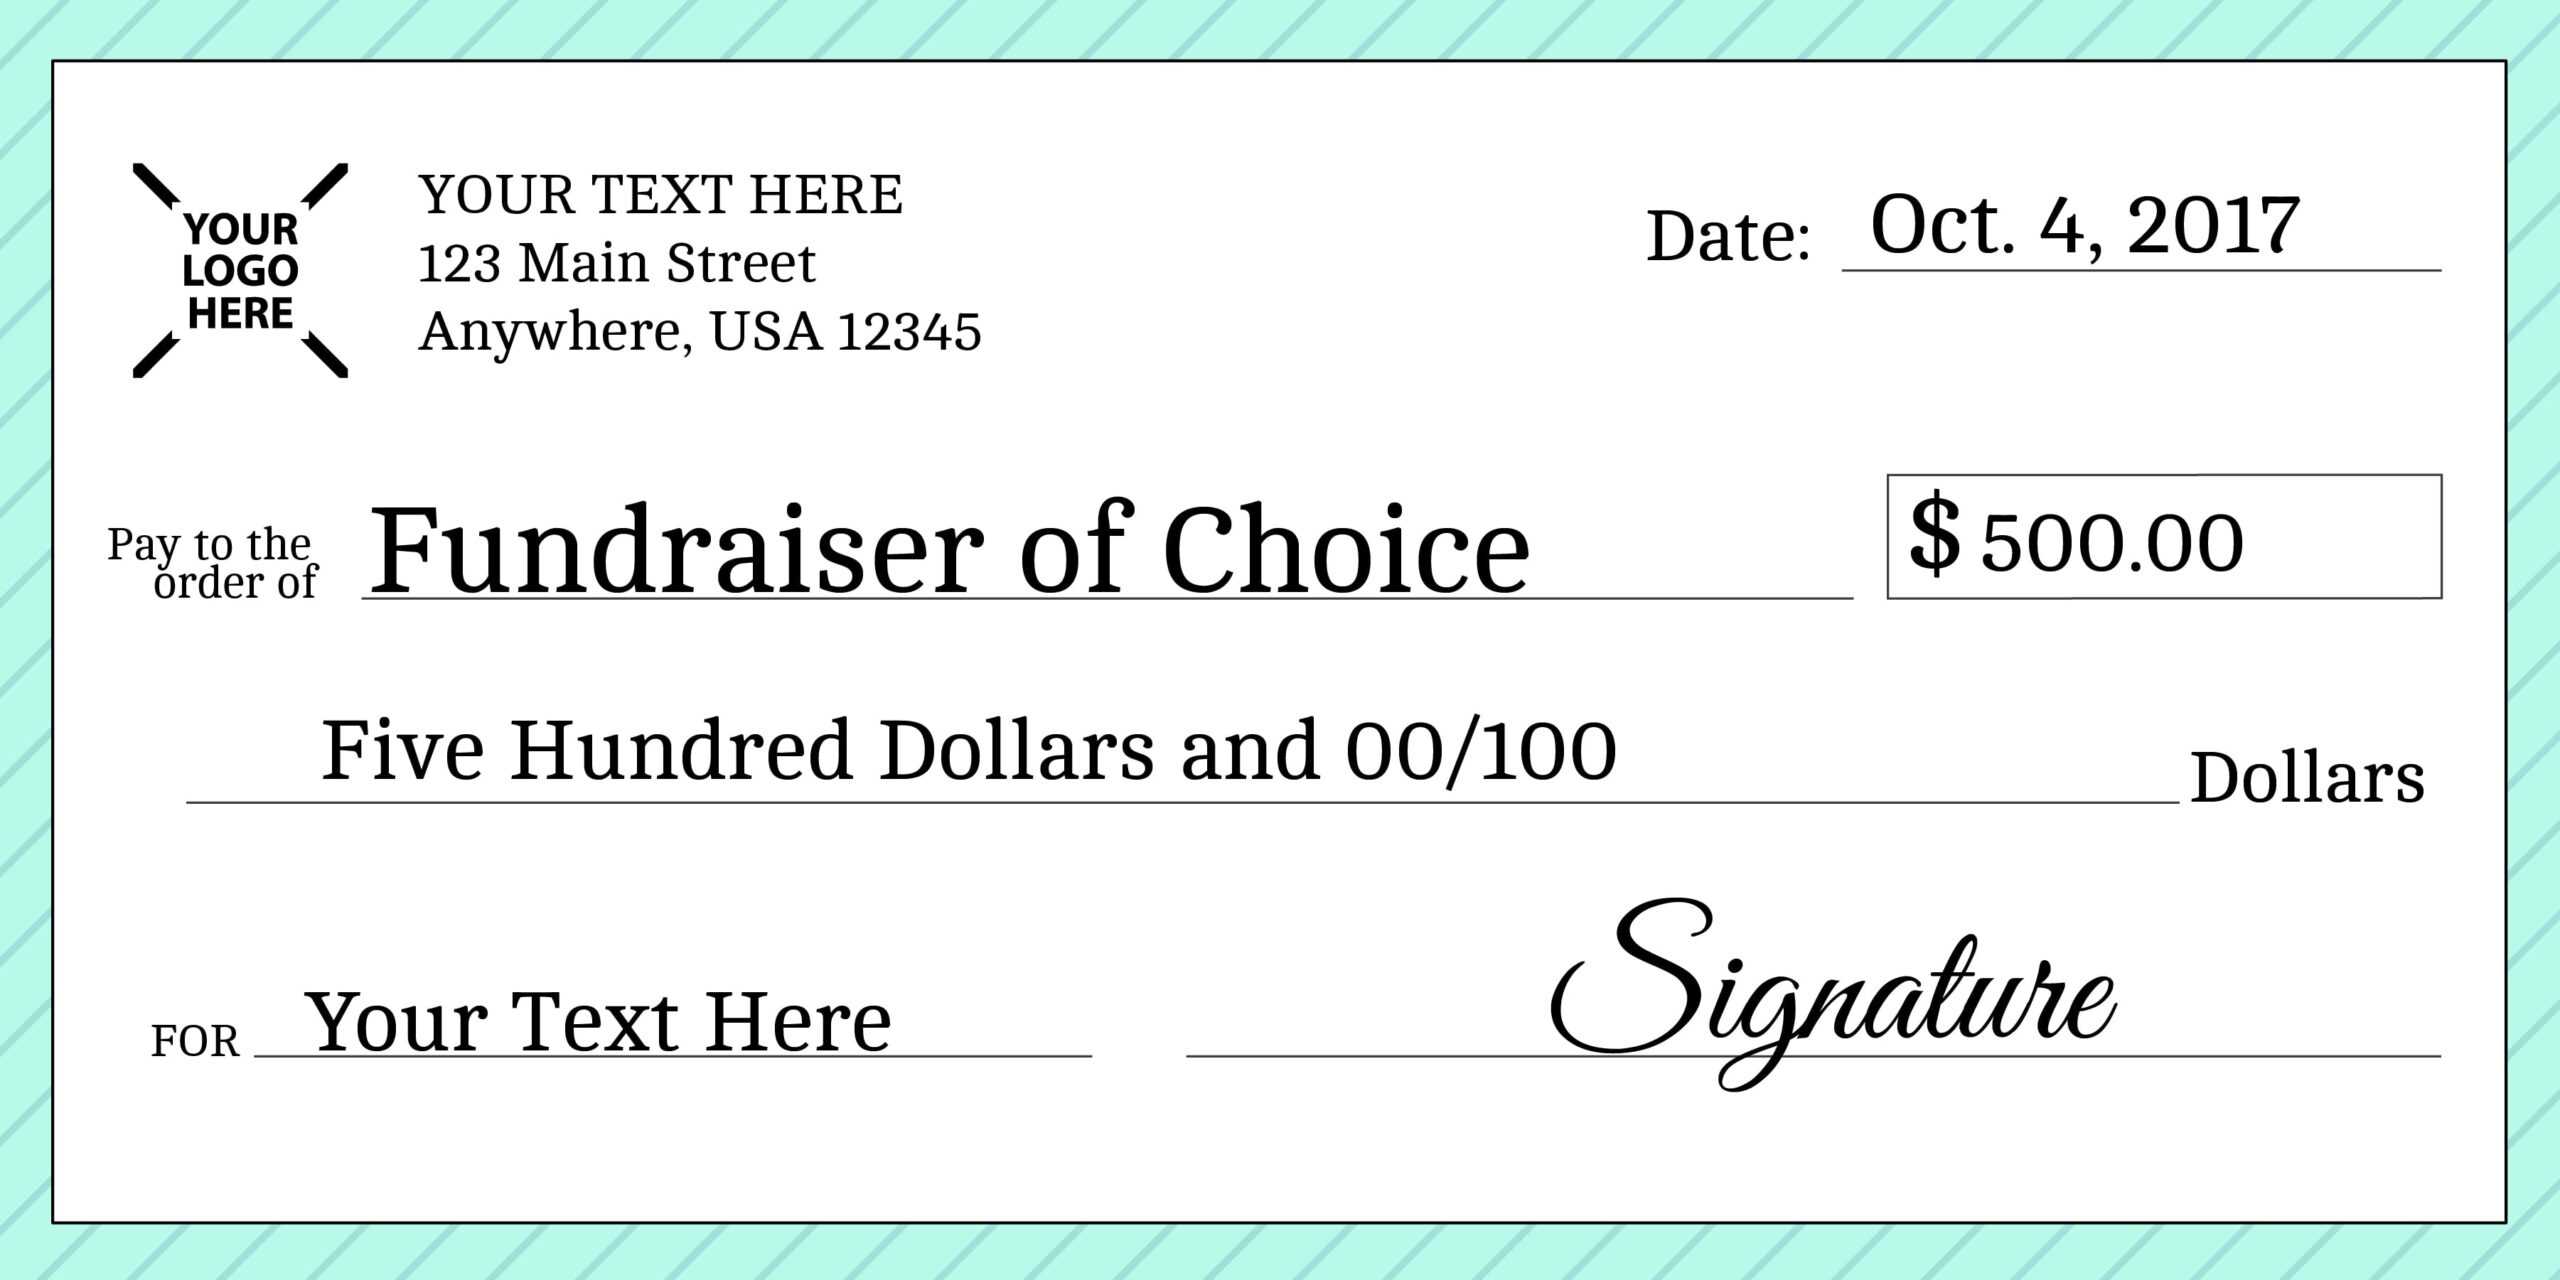 Signage 101 - Giant Check Uses And Templates | Signs Blog Within Large Blank Cheque Template